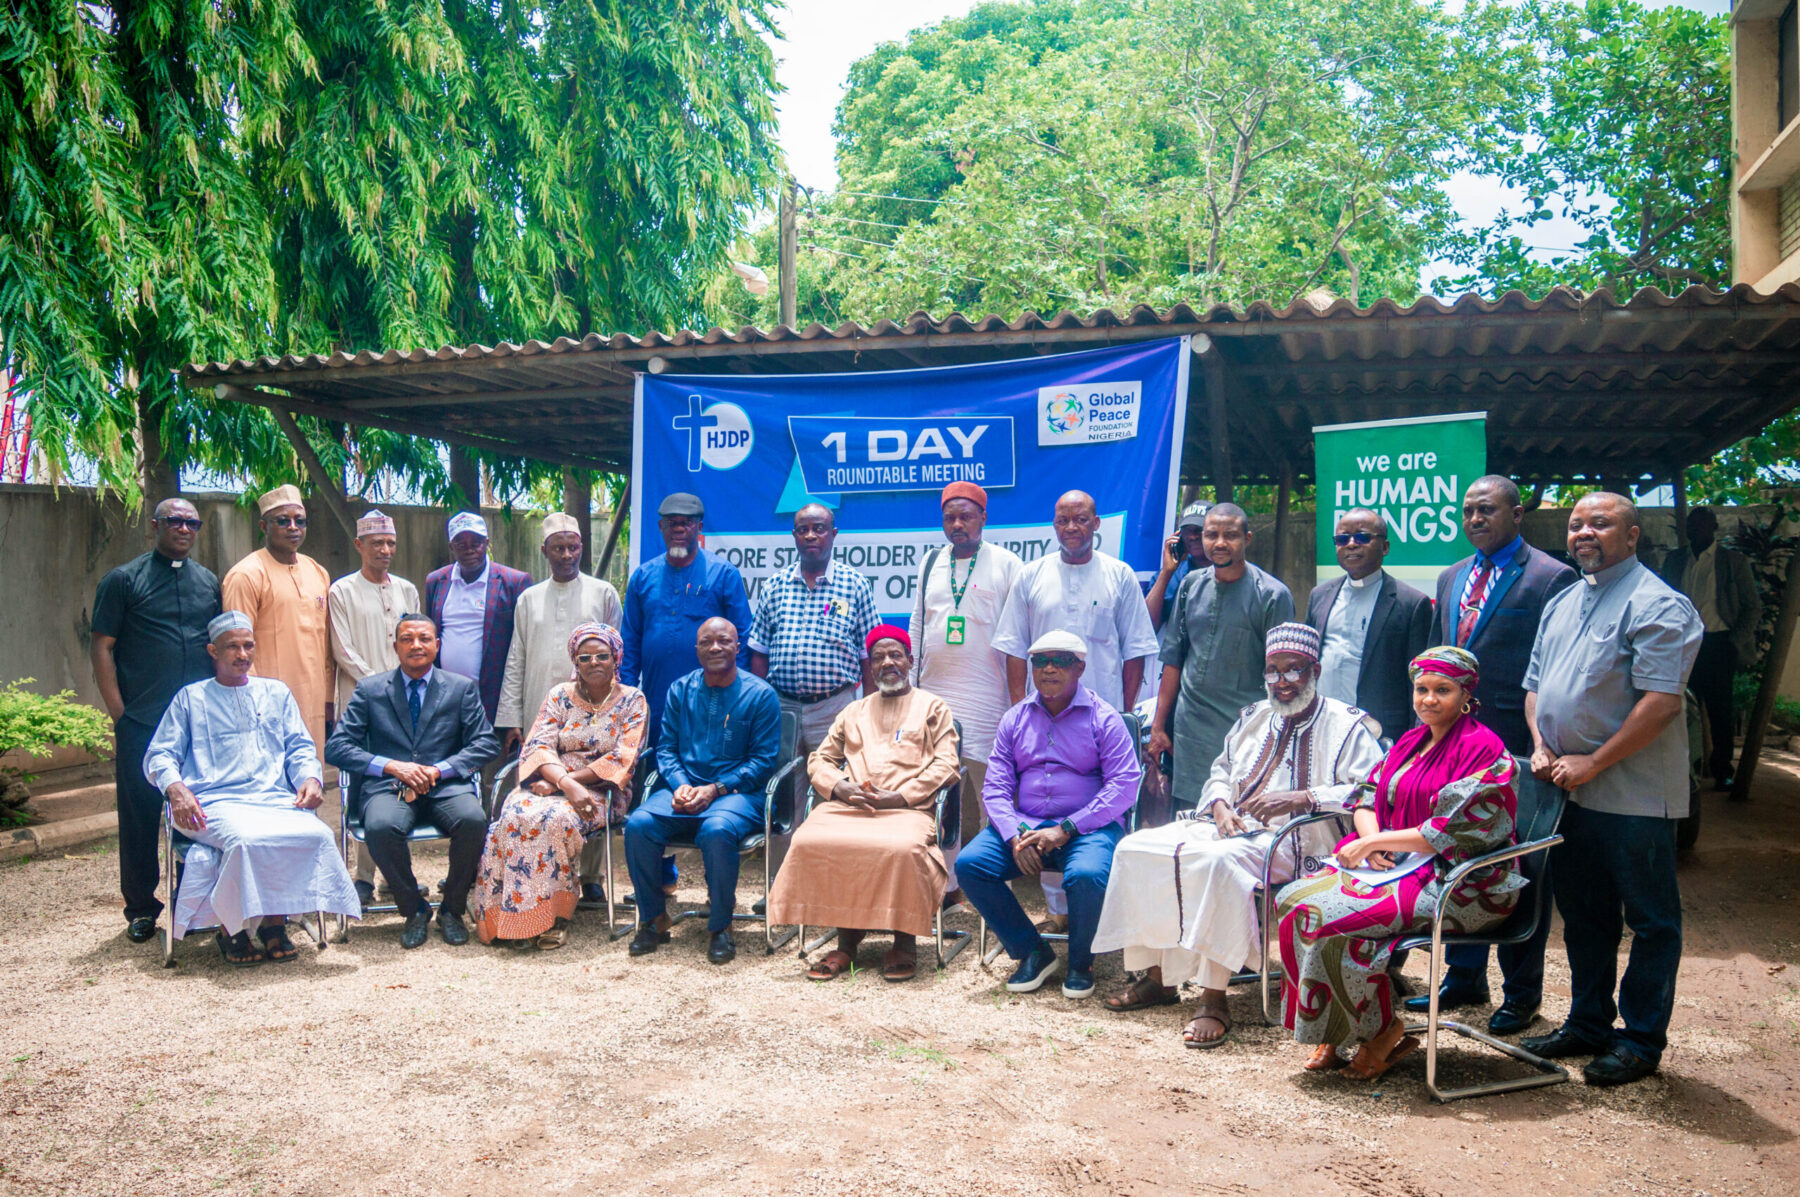 A group of diverse individuals posing for a photo in front of a banner during an outdoor stakeholder meeting, including government officials and religious leaders, with trees and a building in the background.